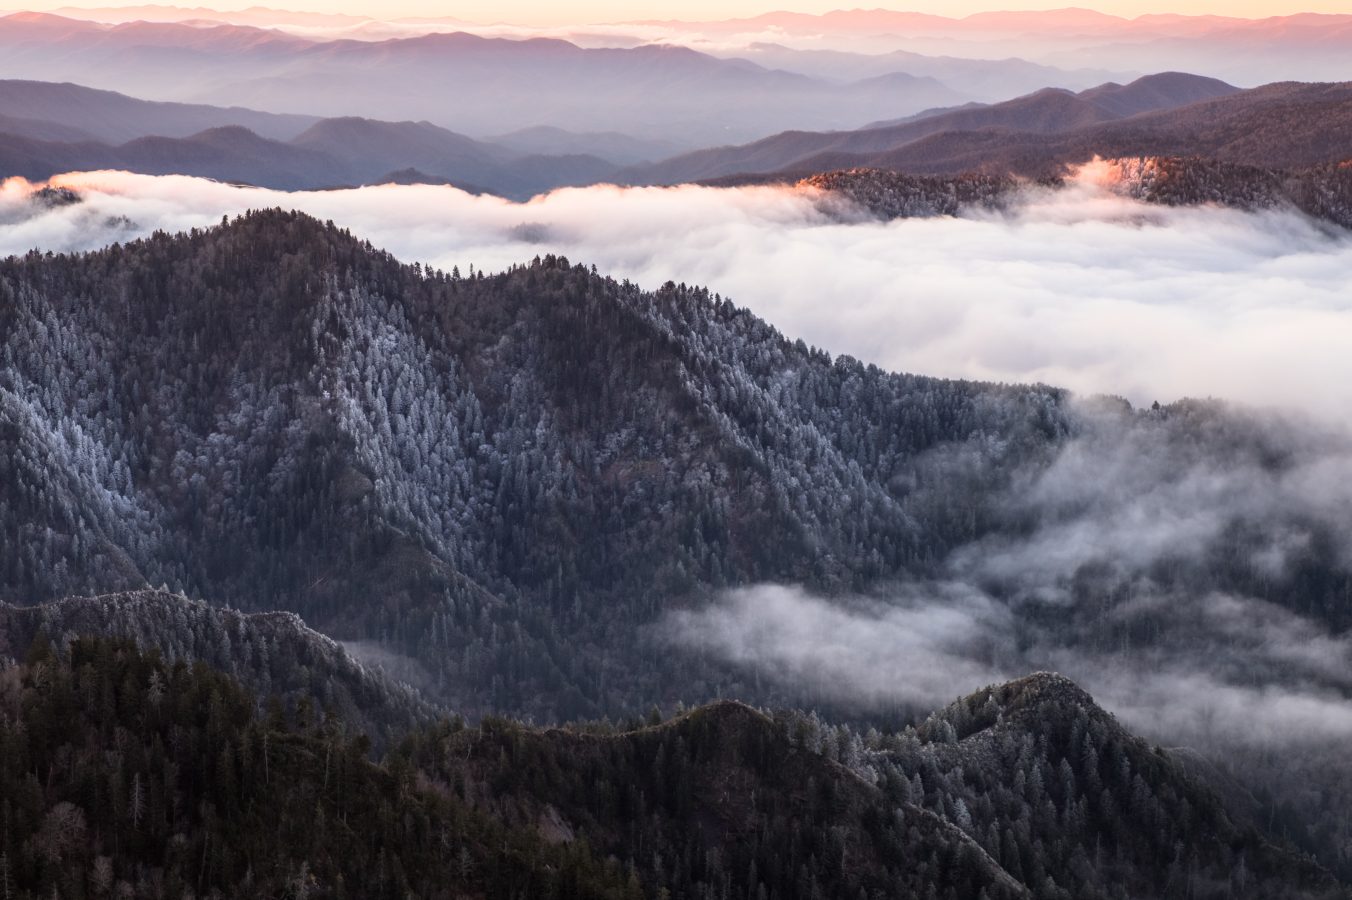 From a viewpoint high in the Great Smokey Mountains National Park in winter stretches a line of mountain ridges to the horizon. It is sunrise and the sky is orange. Low clouds fill the valleys. Misty and foggy